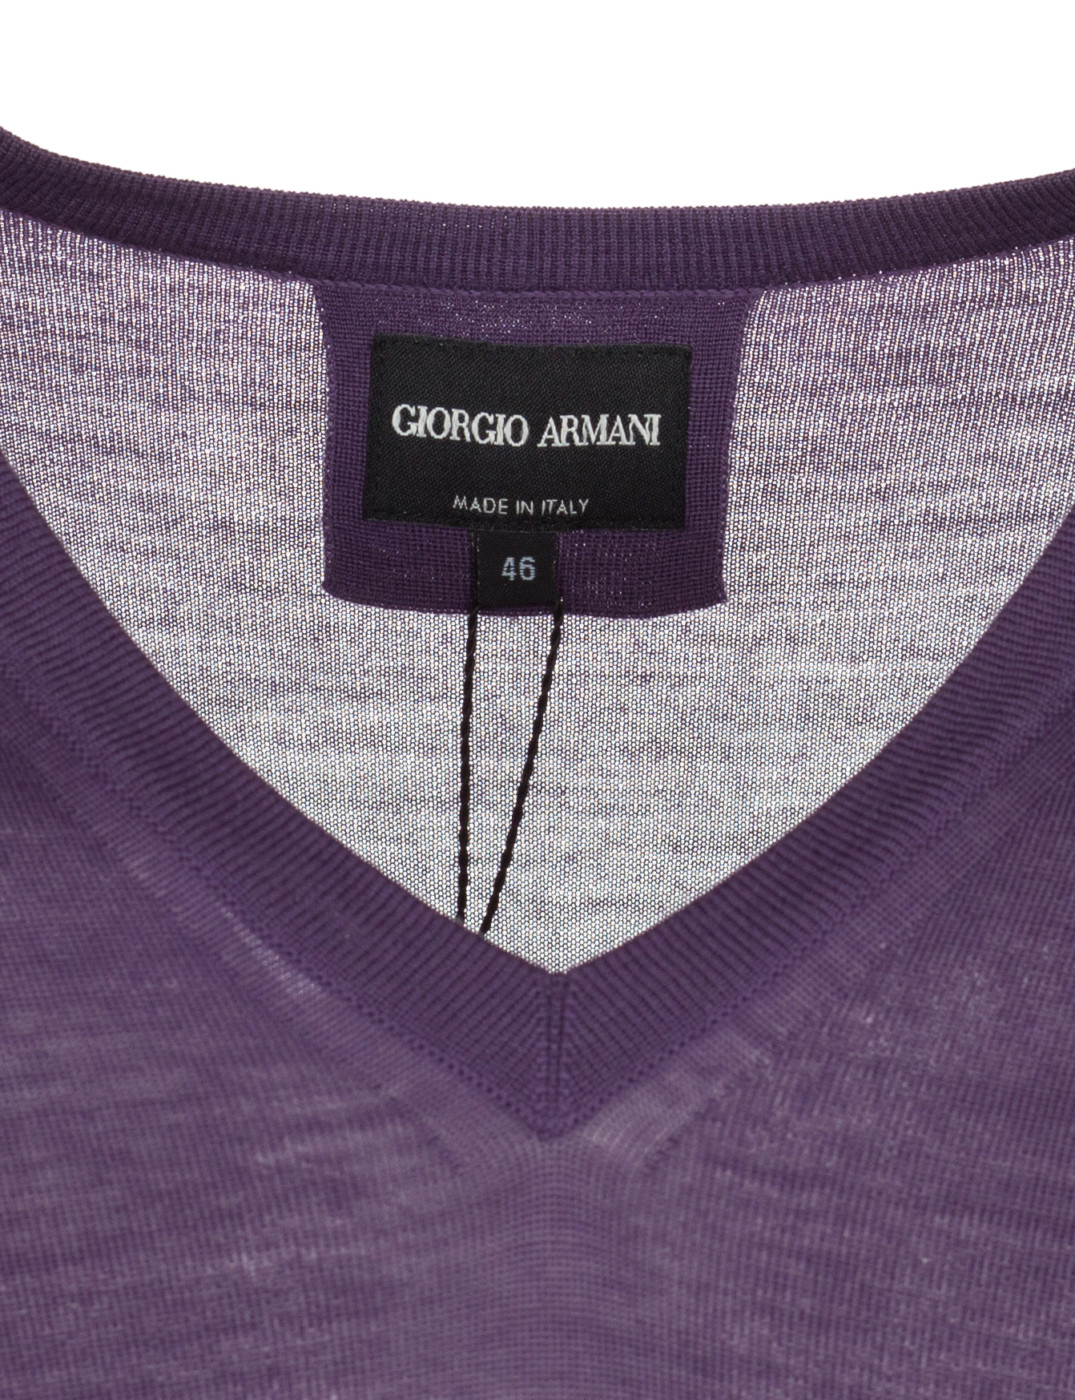 woocommerce-673321-2209615.cloudwaysapps.com-emporio-armani-mens-purple-100-wool-pullover-knitwear-v-neck-sweater